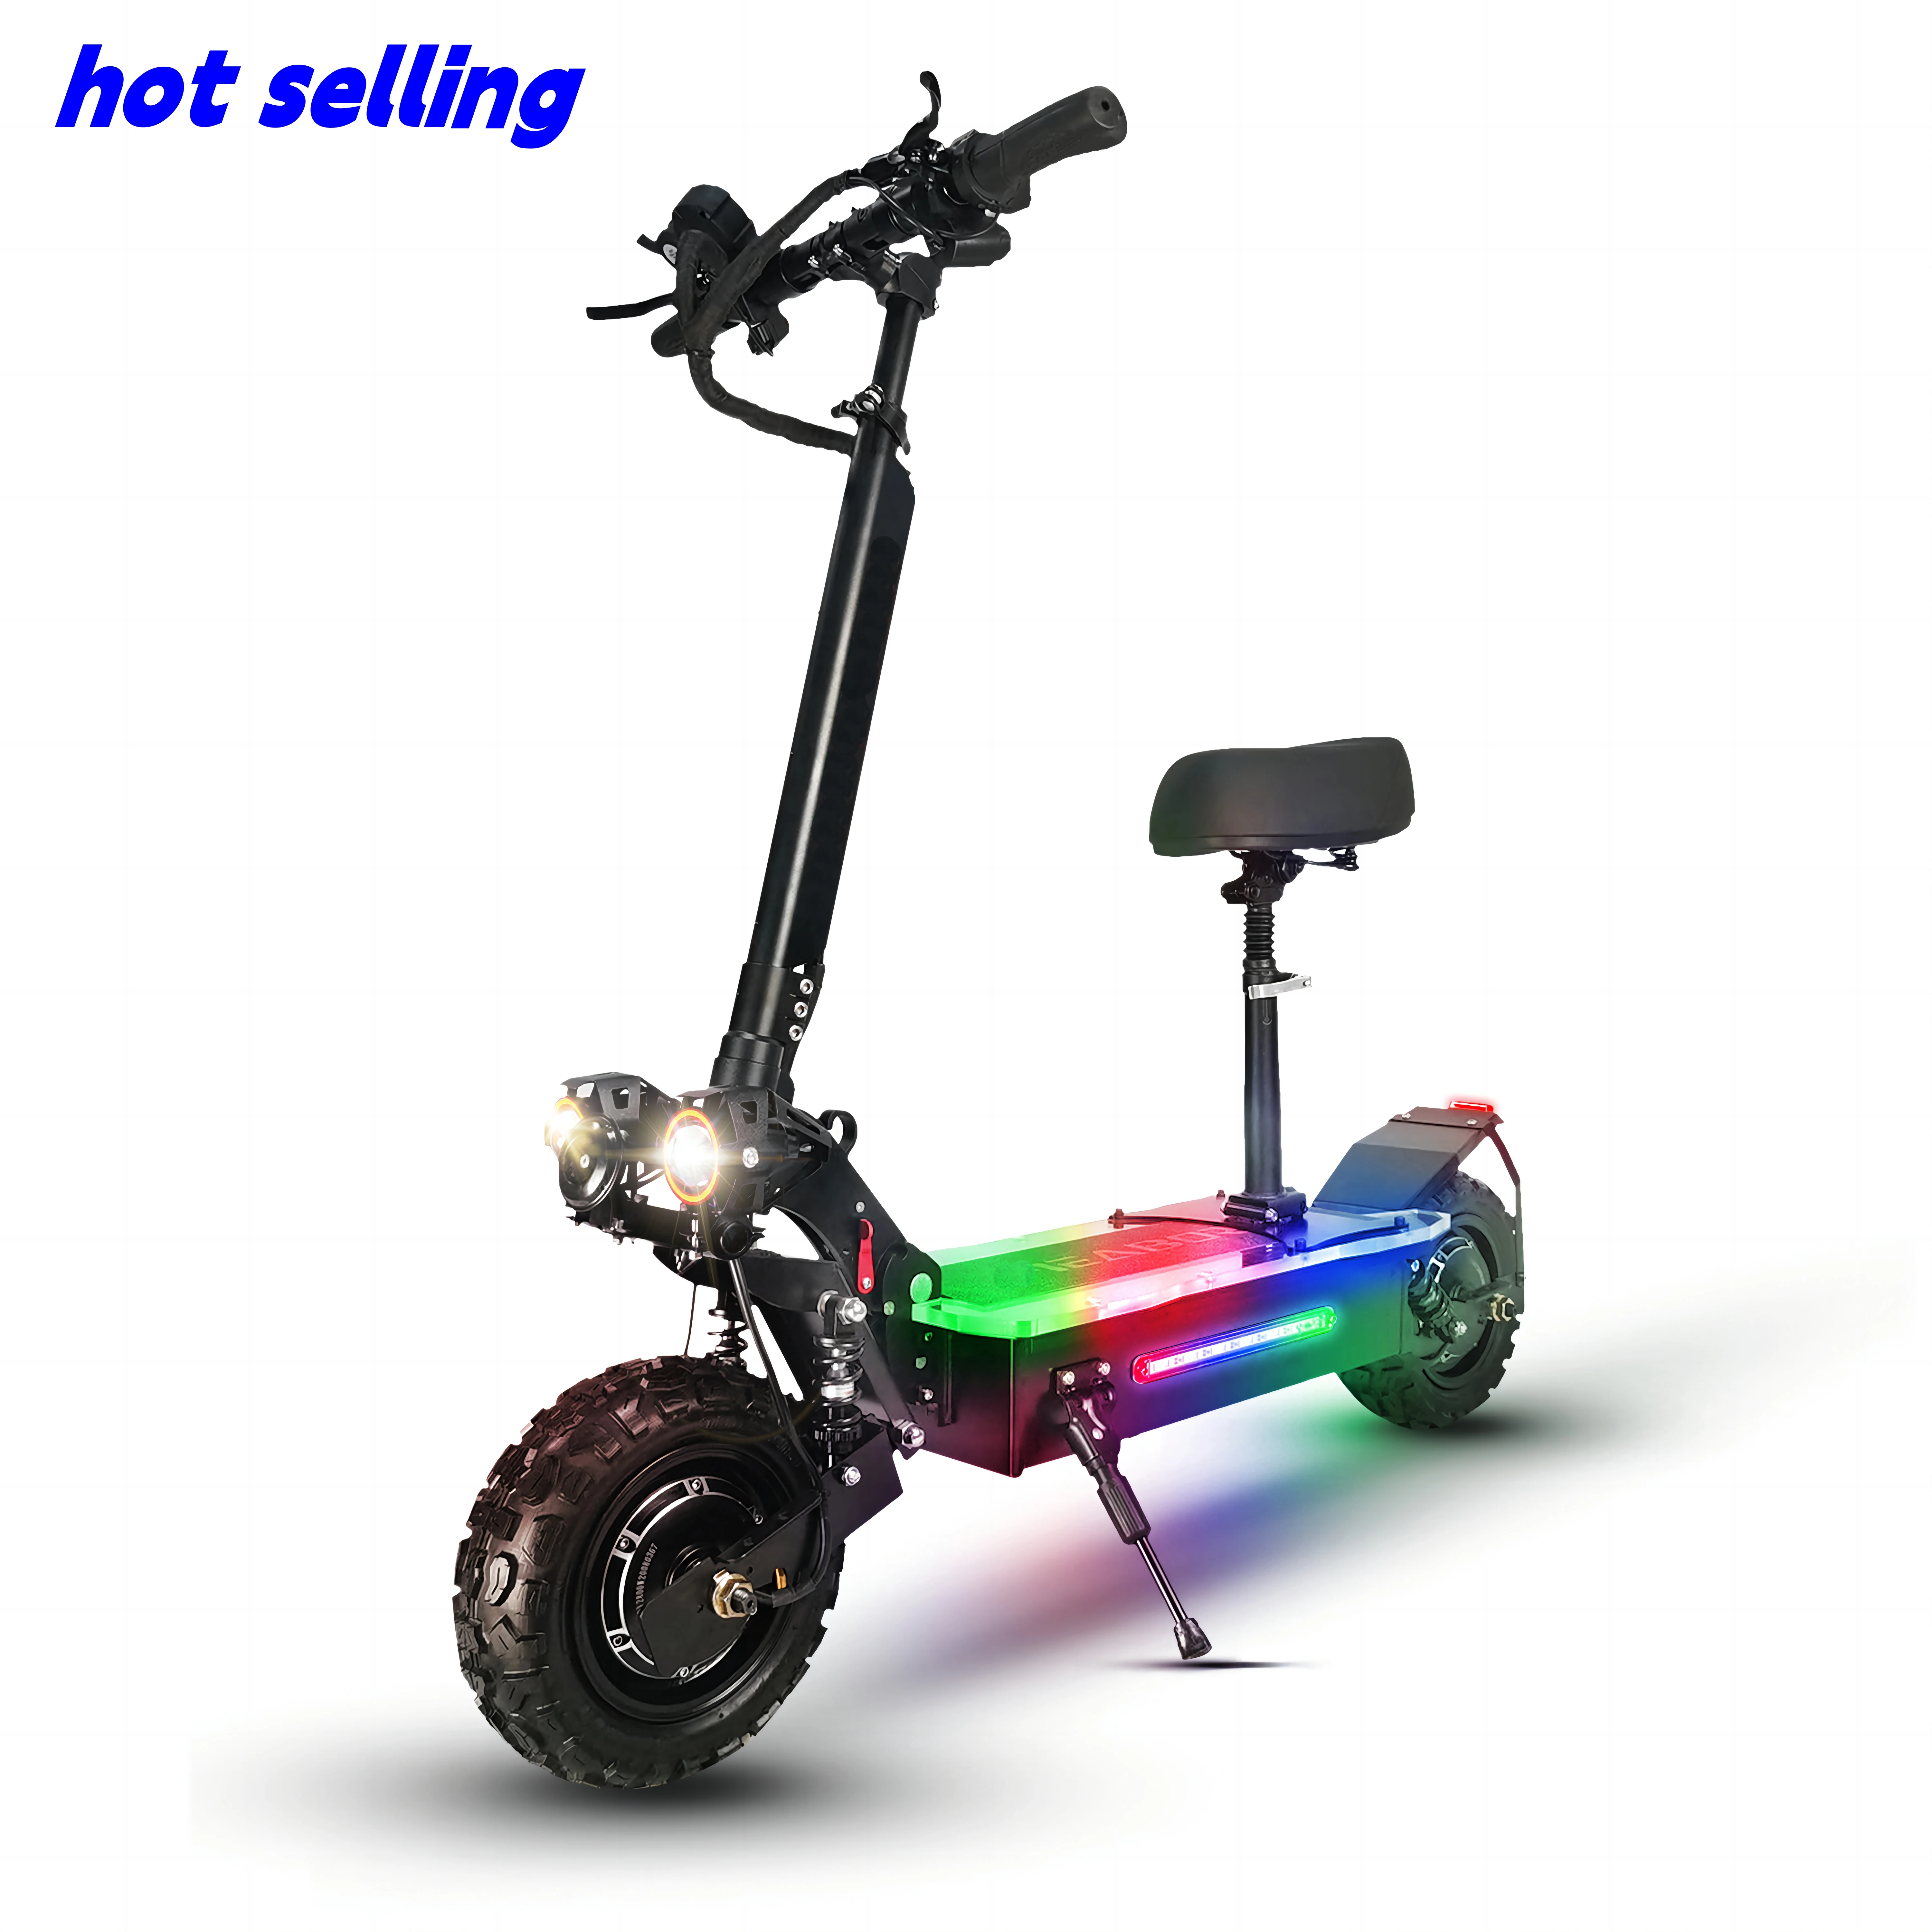 

USA Warehouse free shipping foldable two 11inch off road tires 60v 27Ah 5600w dual motor electric scooter for adults with seat